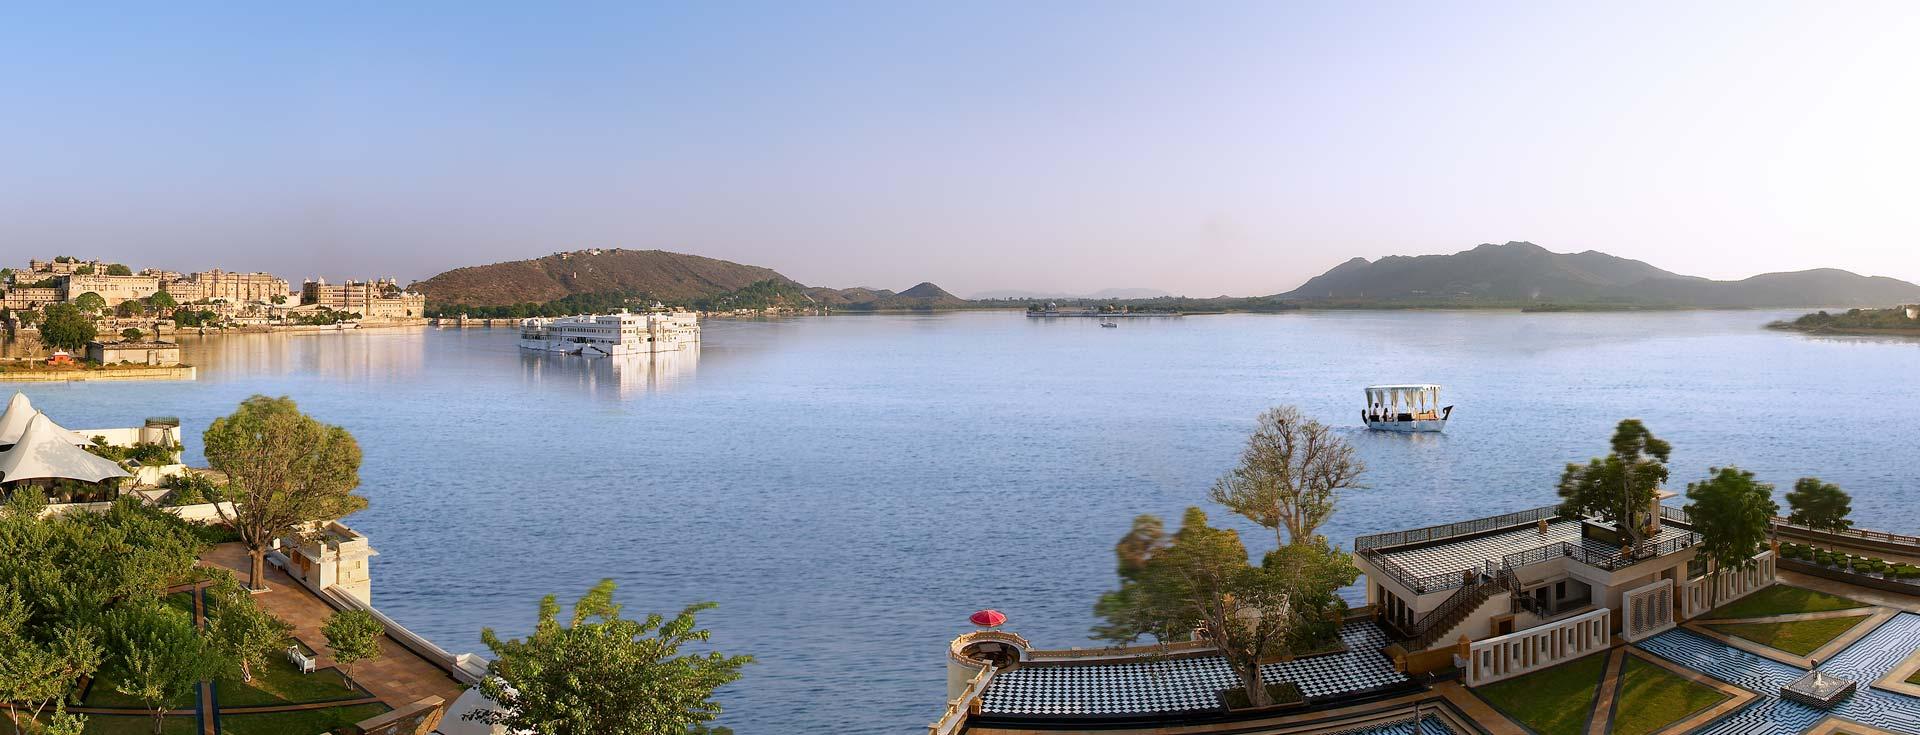 Lake Pichola-All about Udaipur's most famous attraction